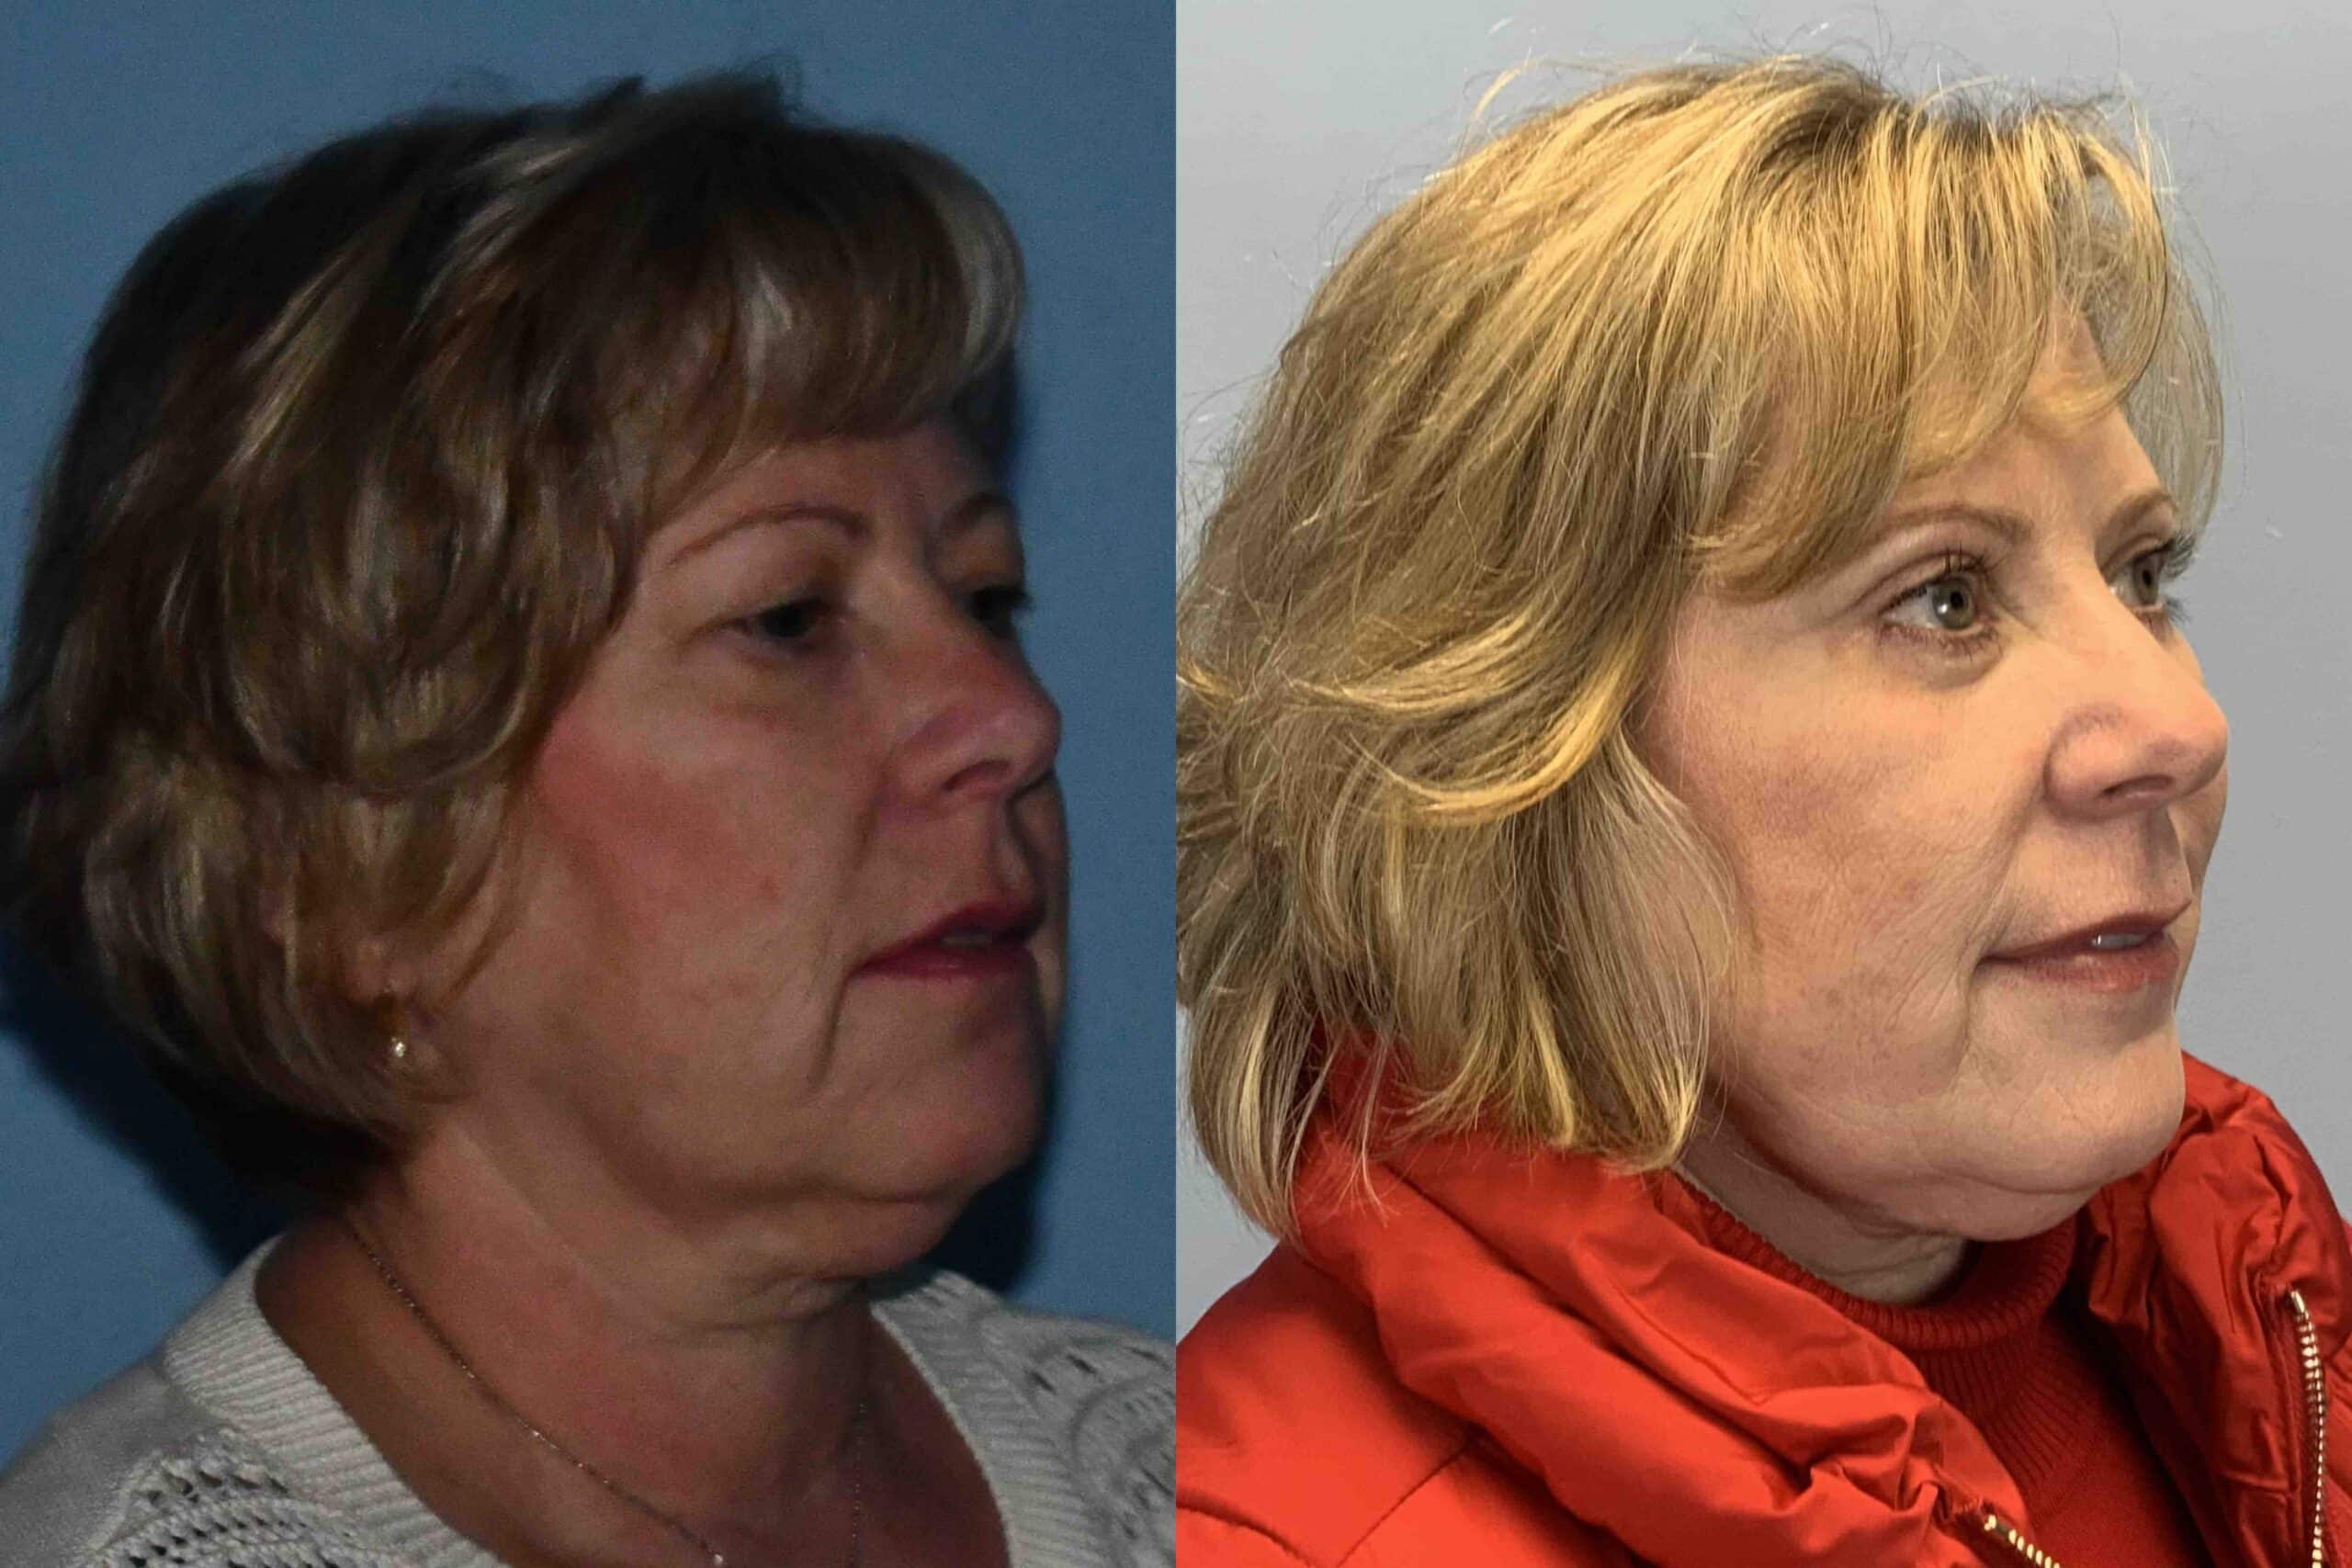 Before and after, 3 mo post op from Upper and Lower Blepharoplasty, Canthopexy (diagonal view)